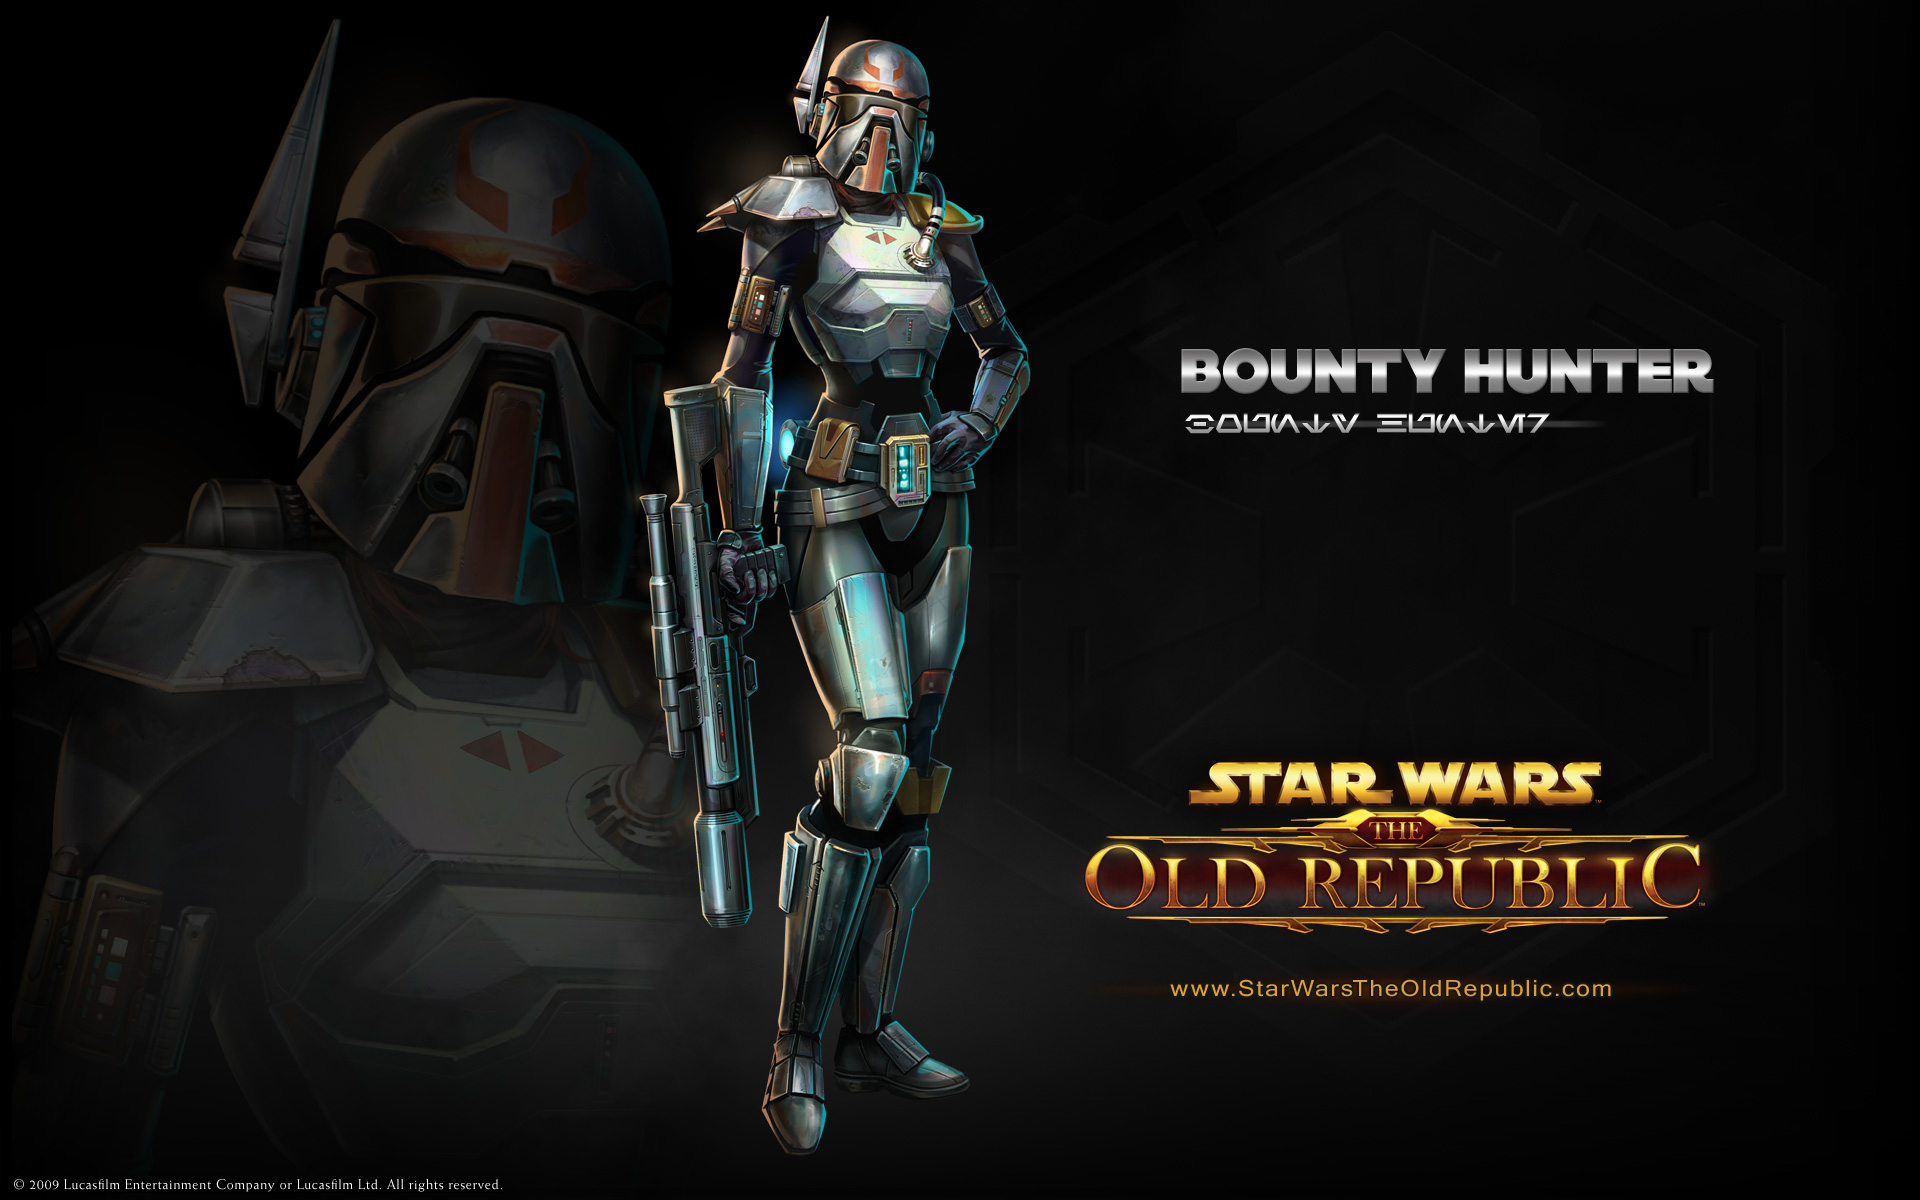 Swtor Star Wars The Old Republic Bounty Hunter Guide